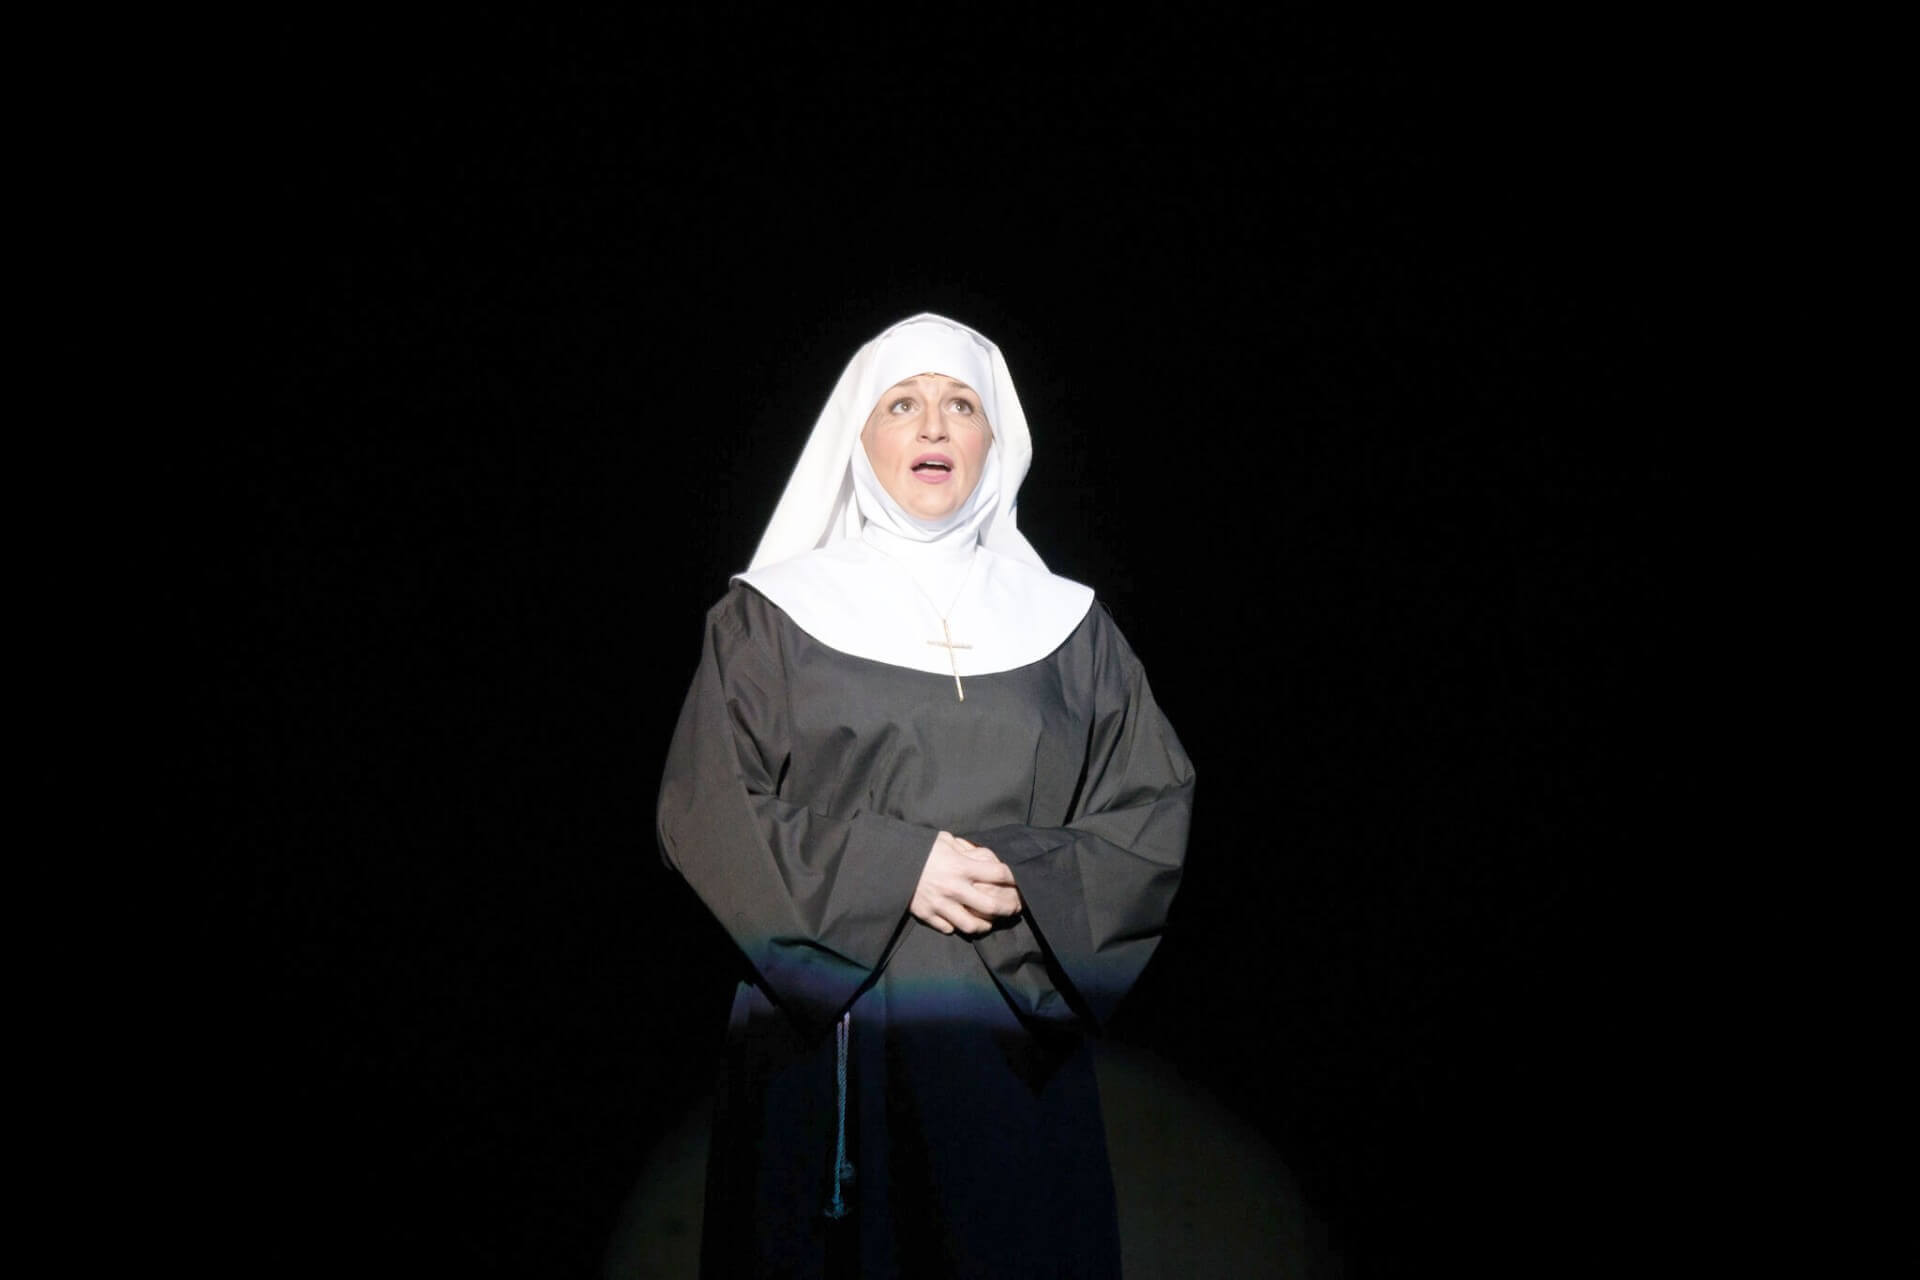 Nuns Habbit - Sister Act Costume Rental pictures - Stagecraft Theatrical